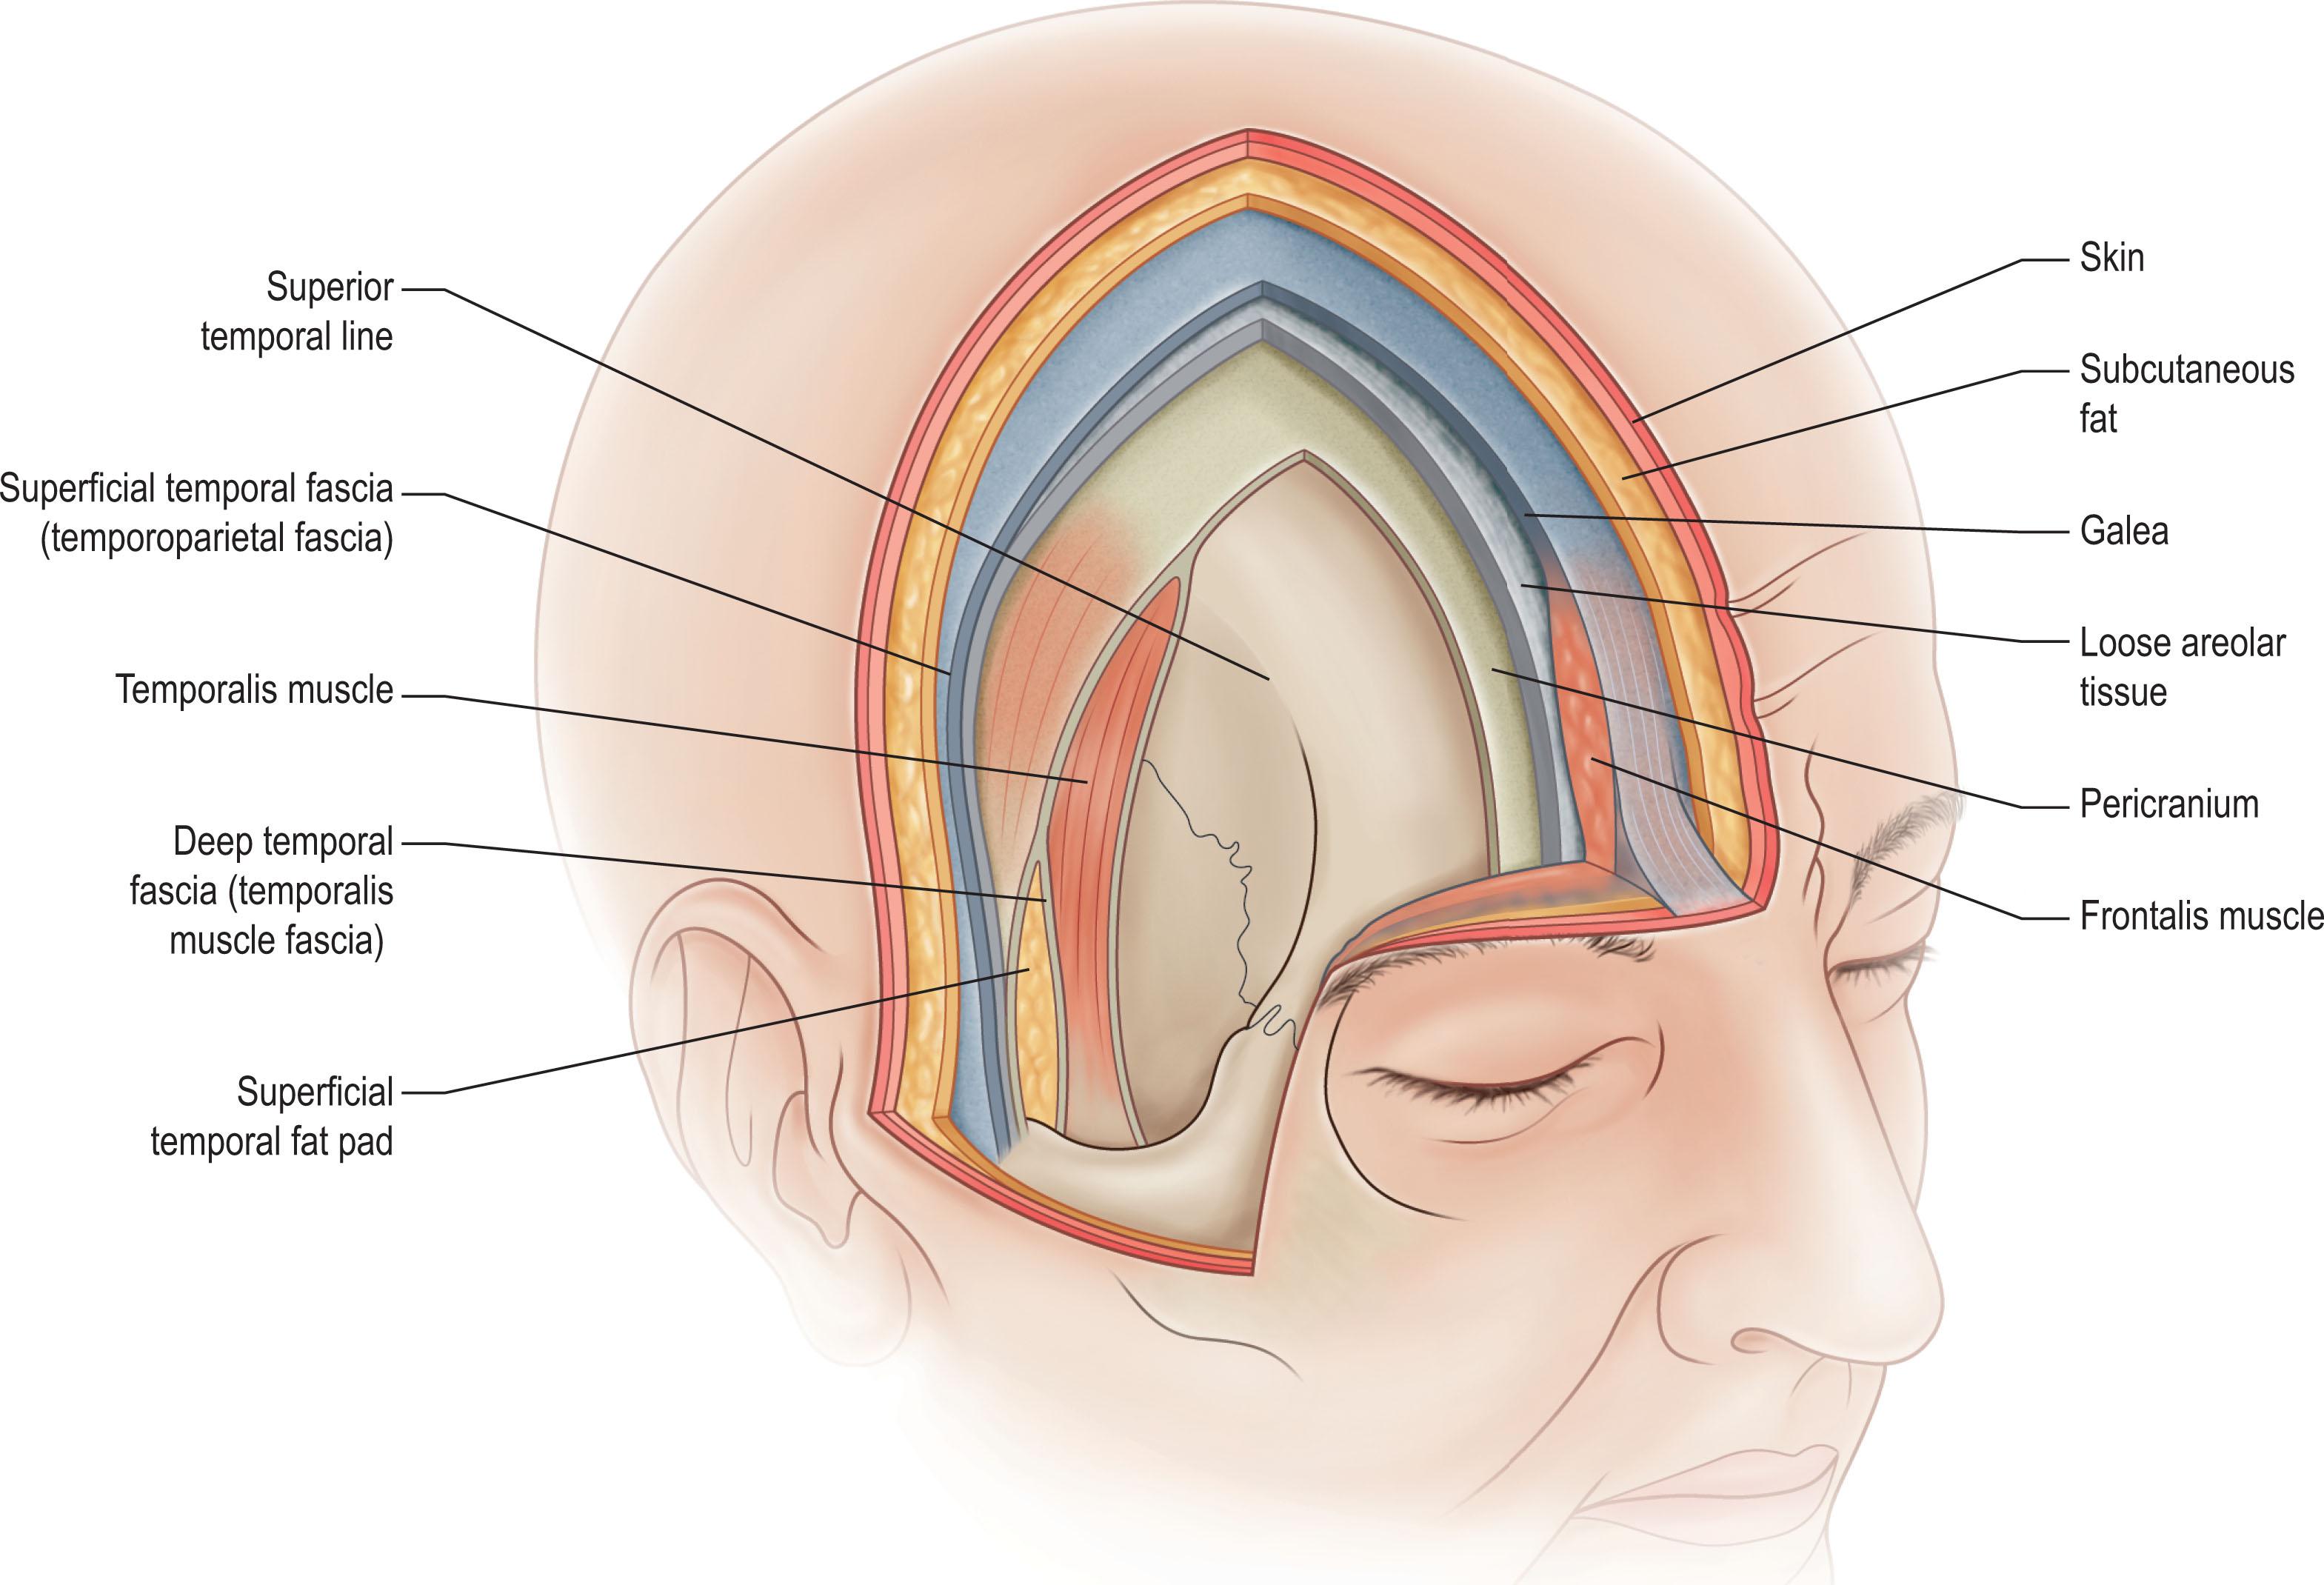 Figure 2.1, lllustration demonstrating the layered anatomy of the scalp.